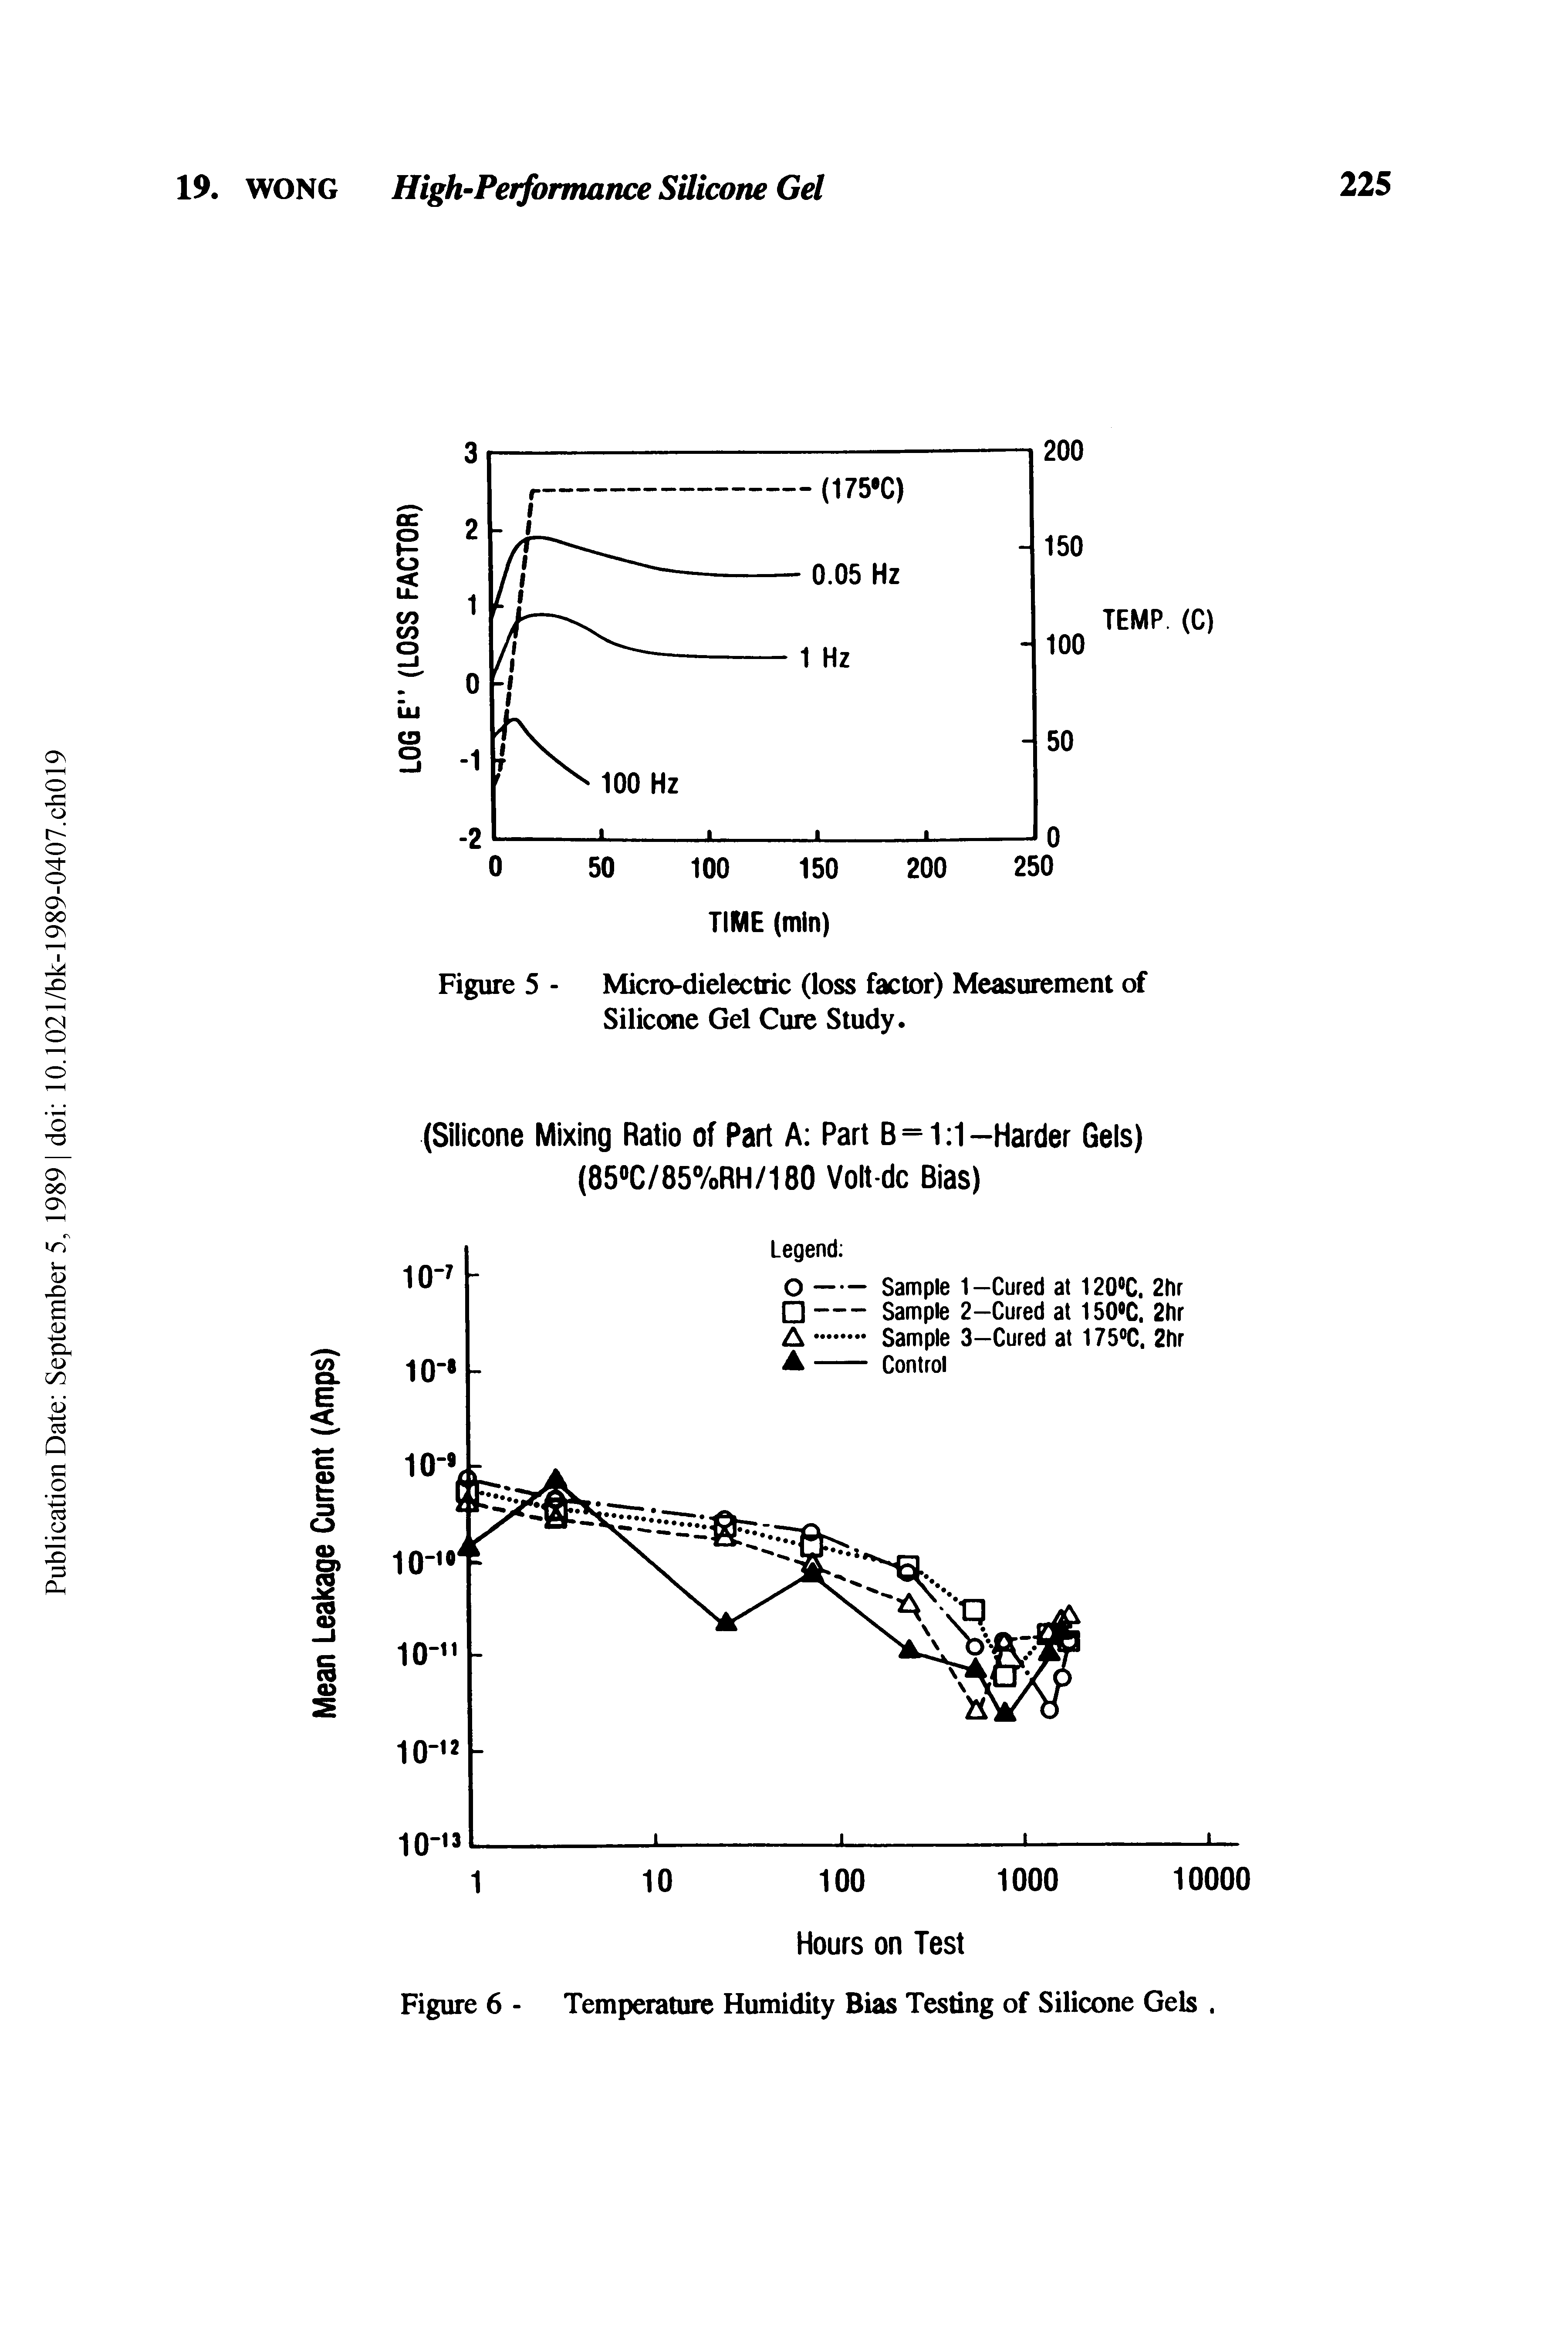 Figure 5 - Micro-dielectric (loss factor) Measurement of Silicone Gel Cure Study.